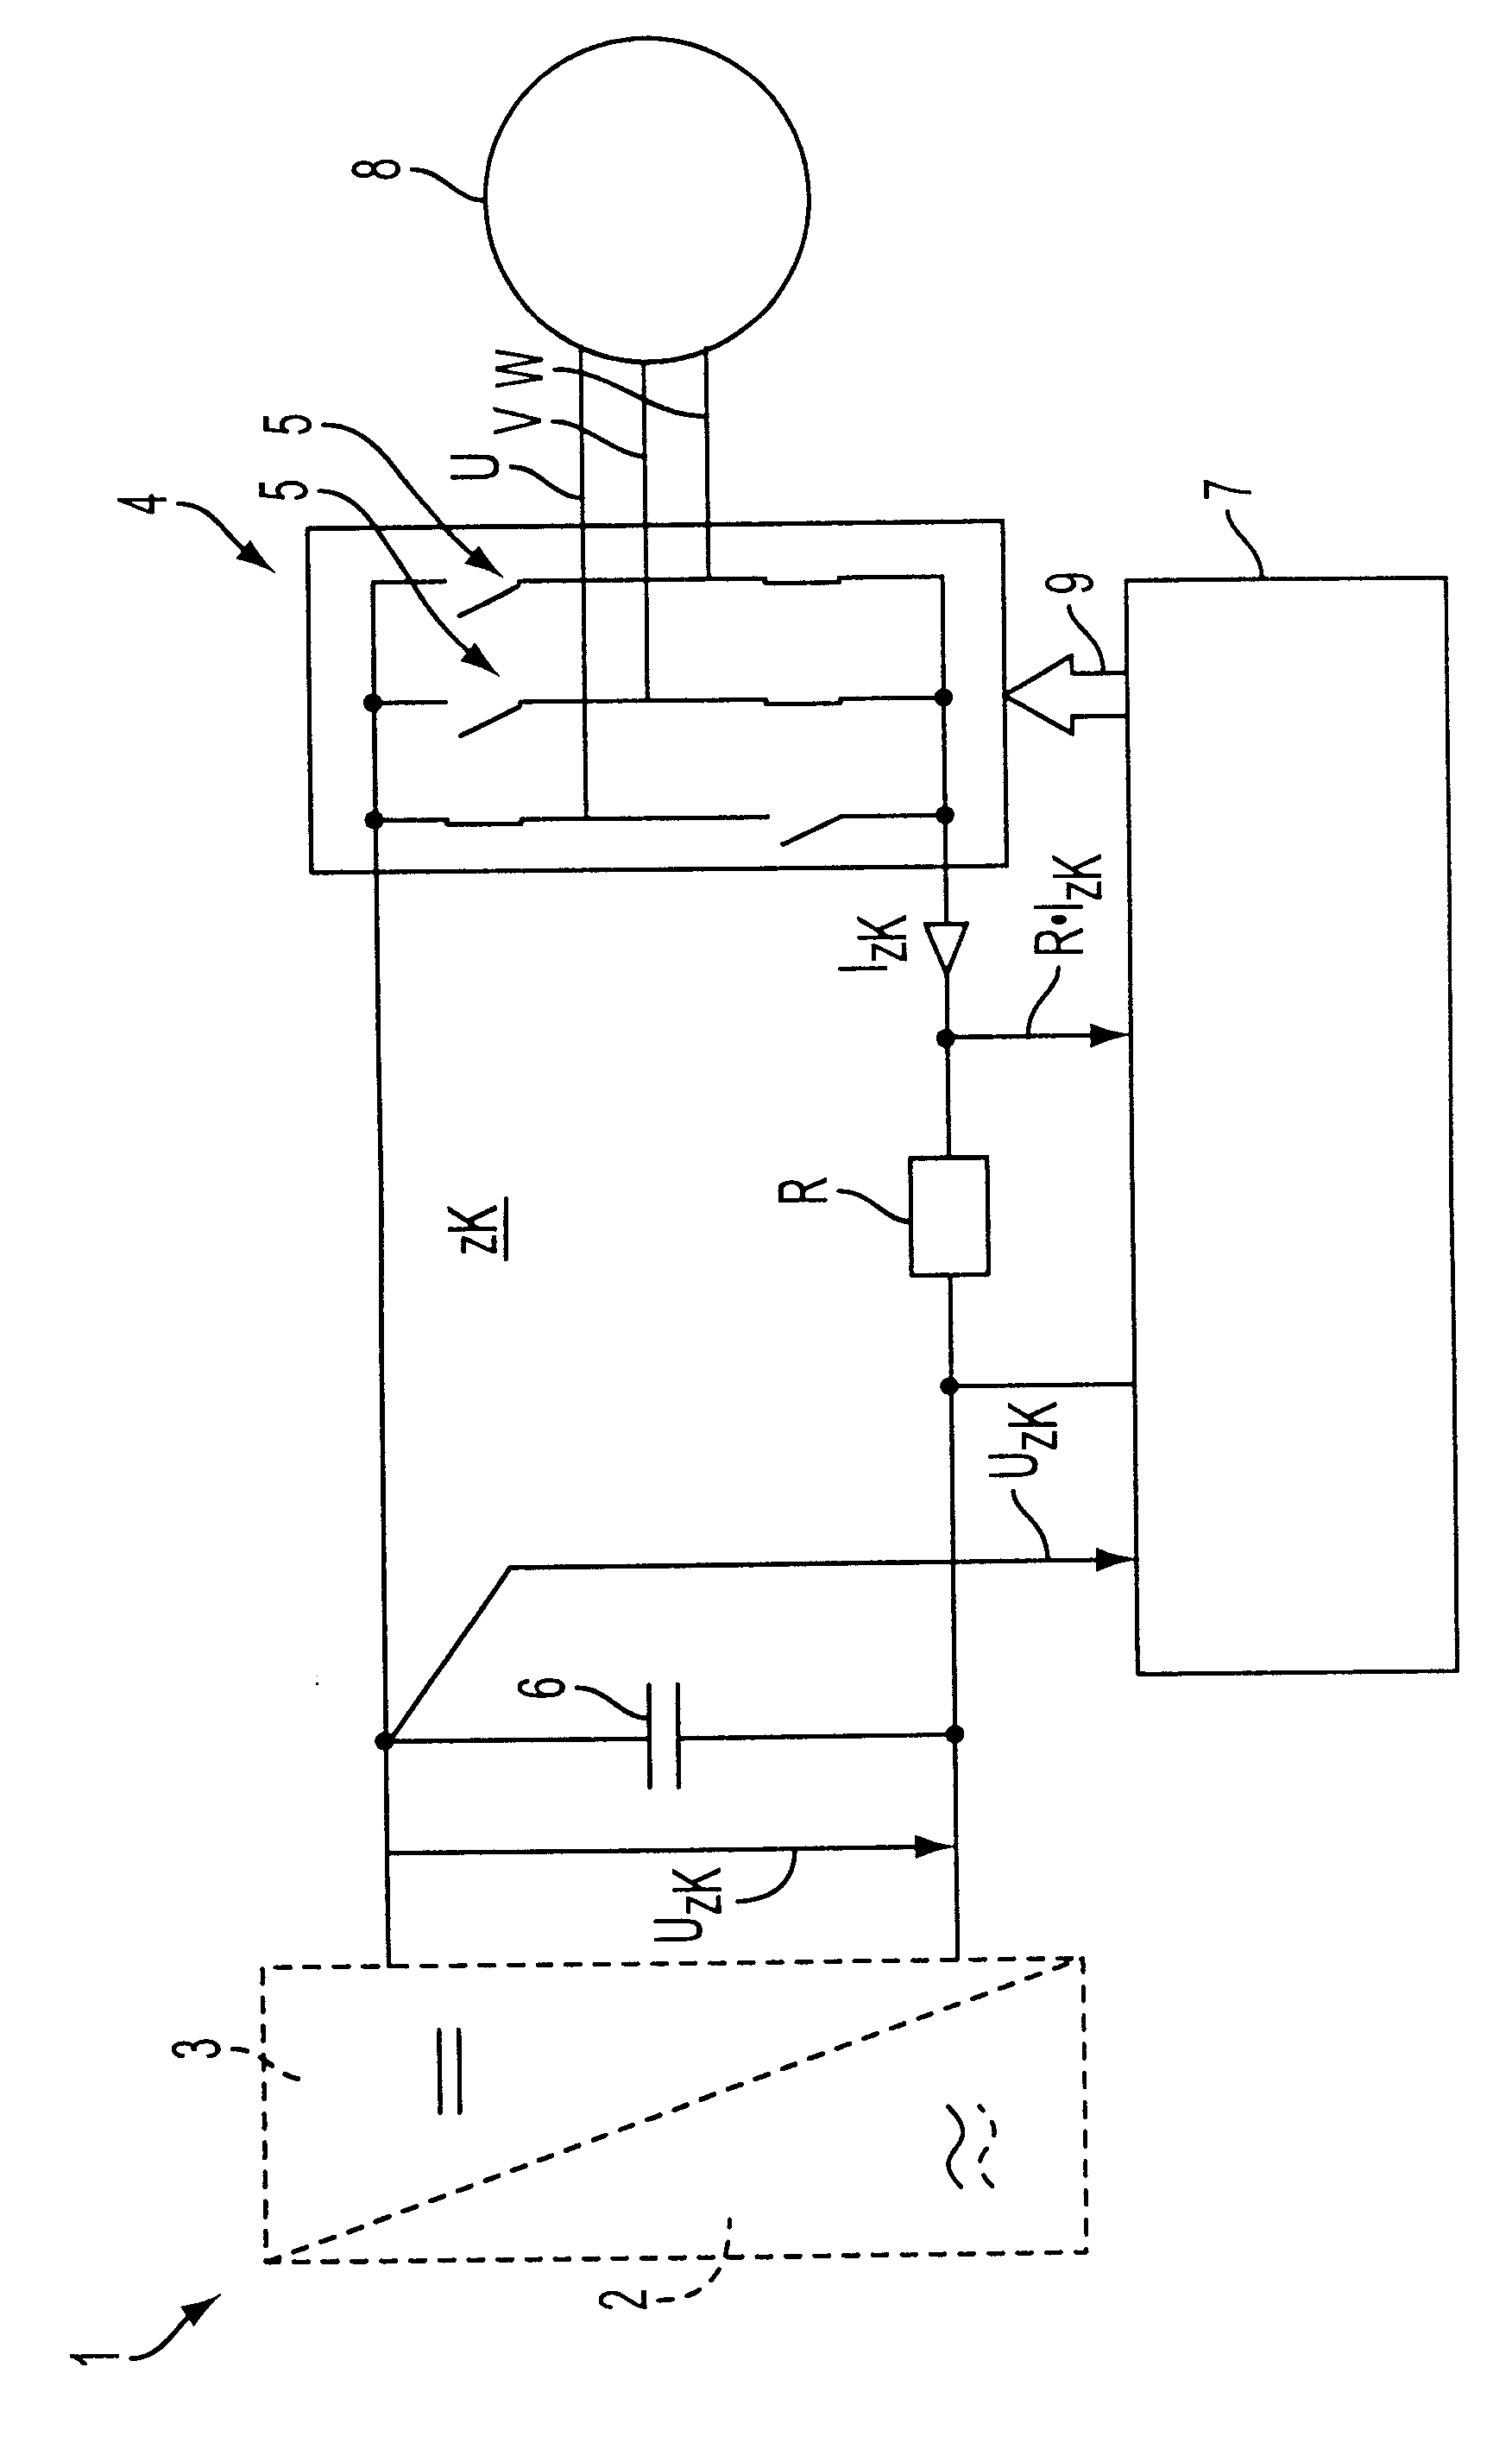 Method for regulating a three-phase machine without a mechanical rotary transducer